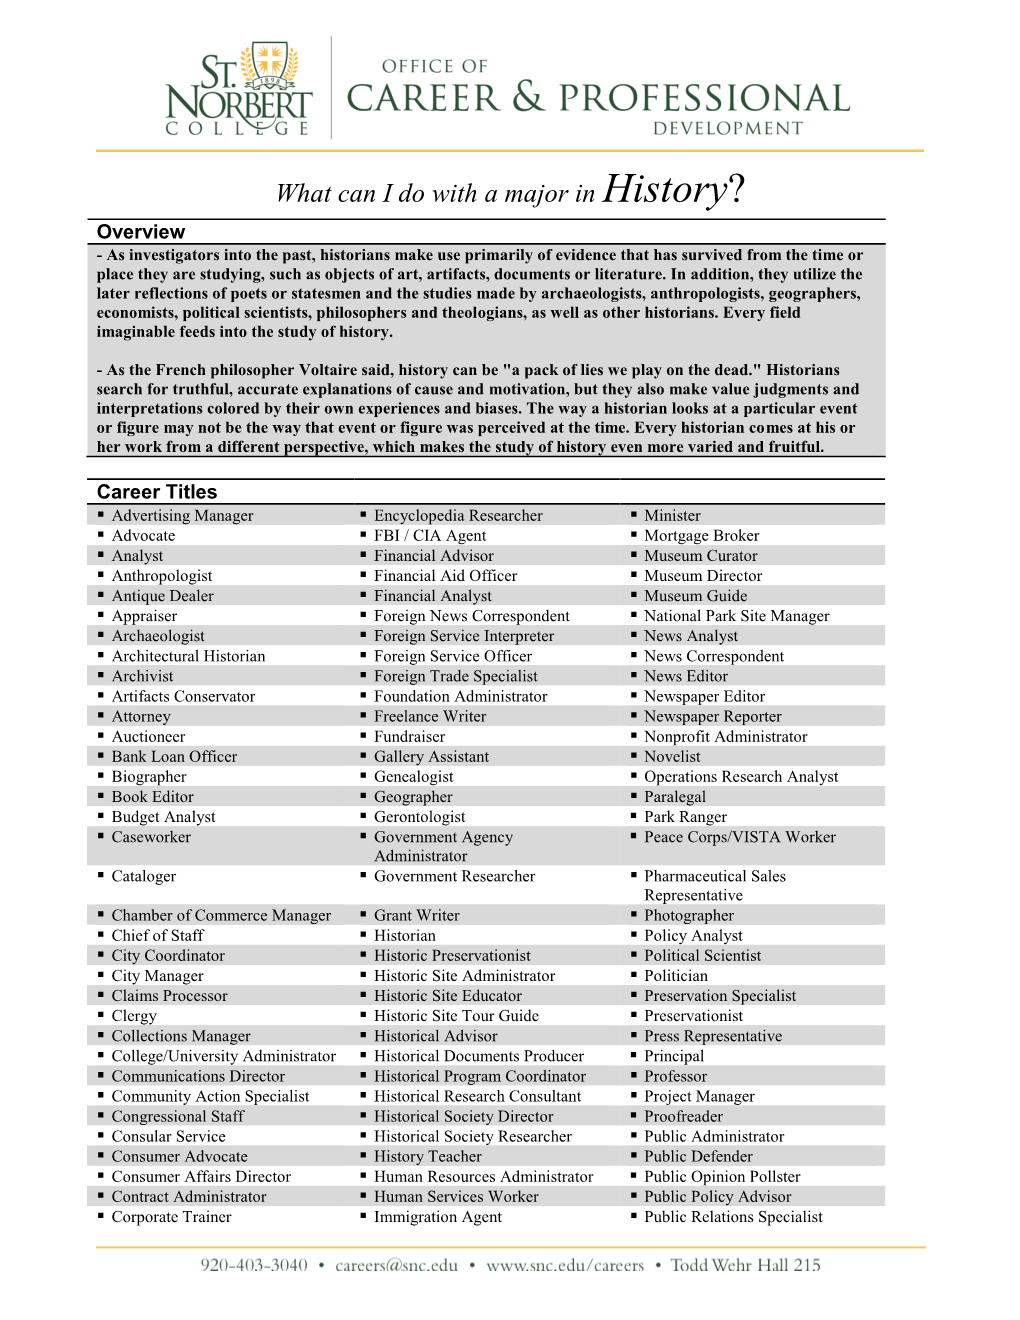 What Can I Do with a Major in History?